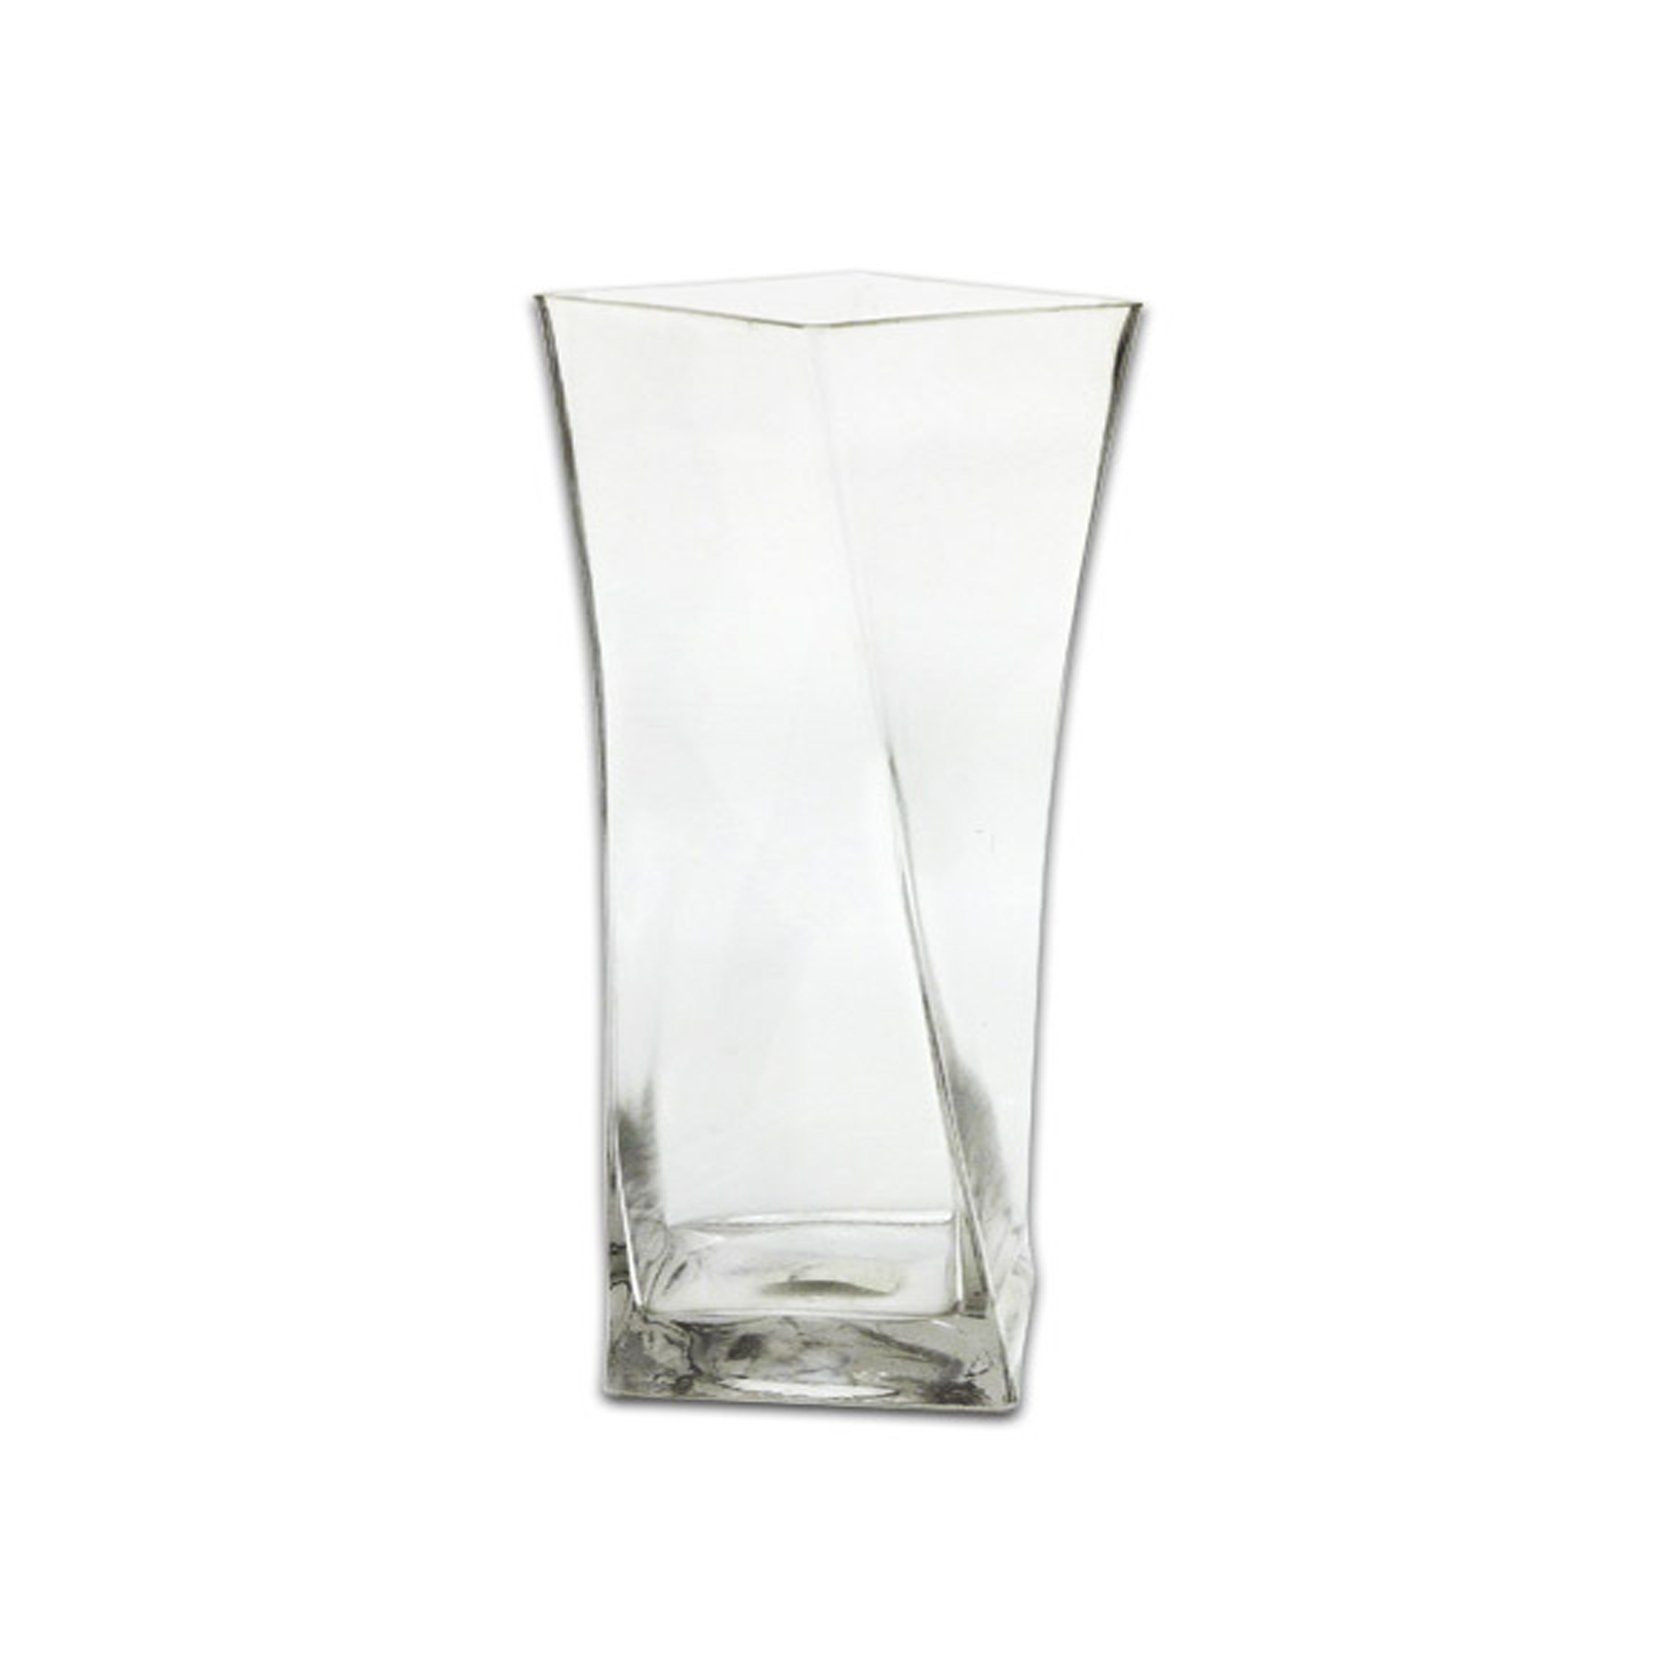 21 Fantastic Twisted Square Glass Vase 2024 free download twisted square glass vase of 48 nachtmann crystal vase the weekly world with anchor hocking 10 inch twisted square vase this twisted vase is